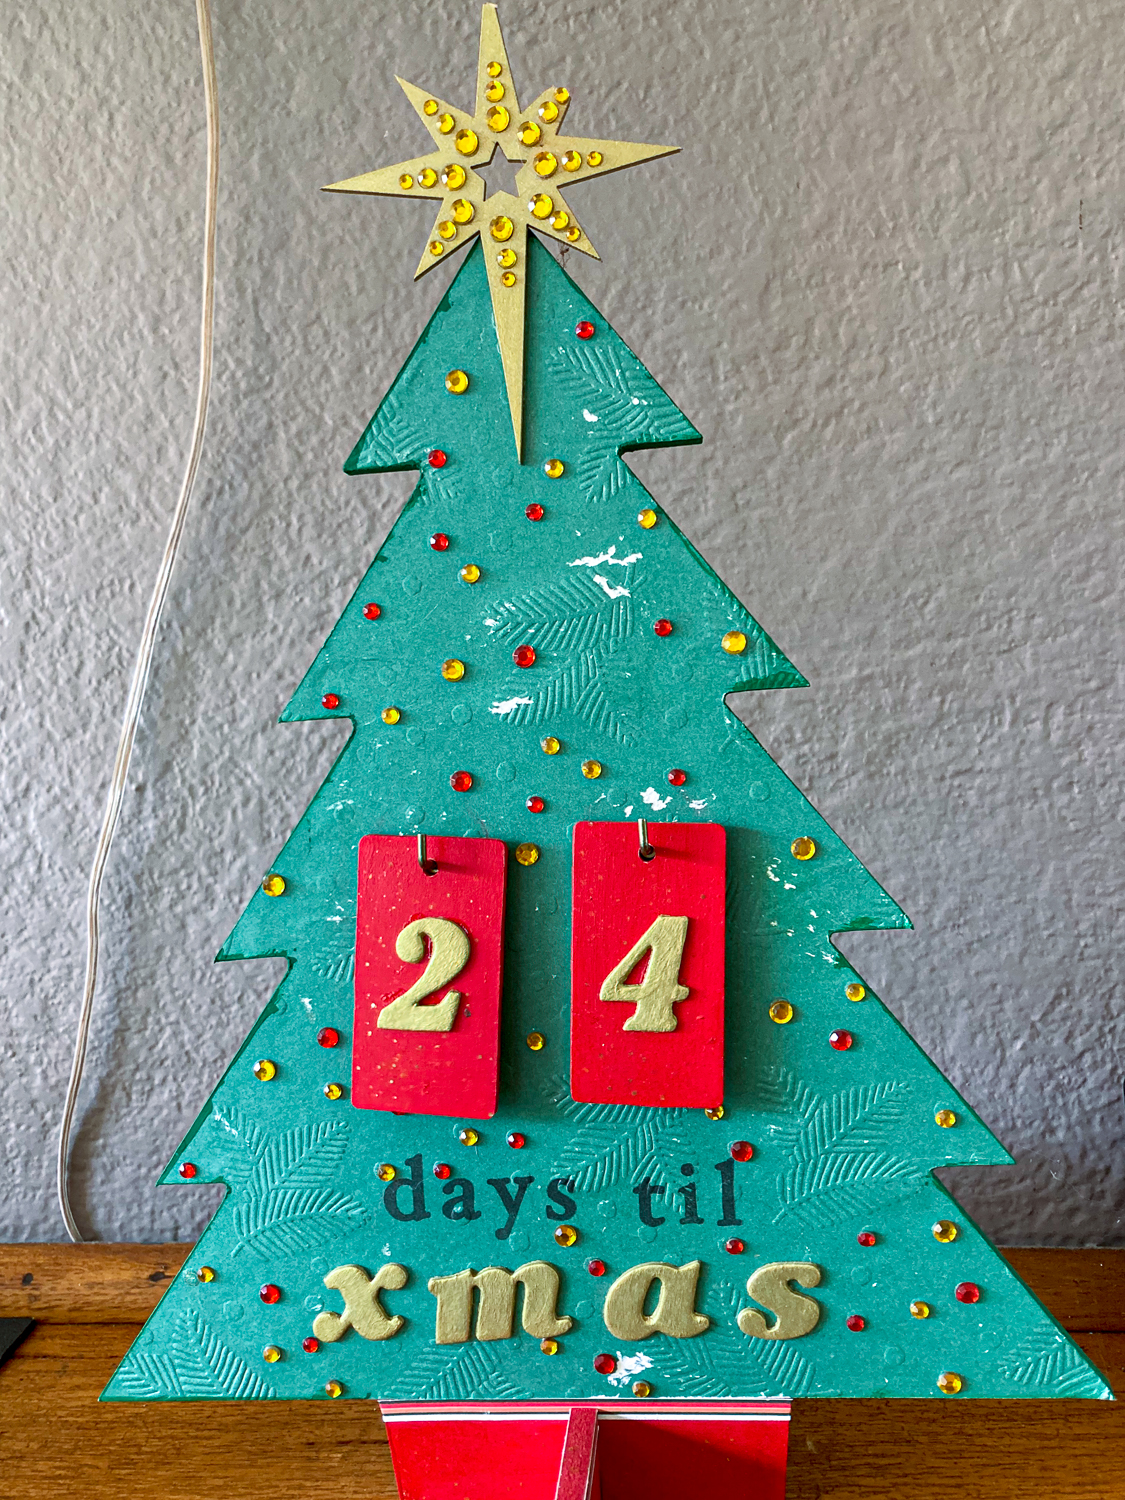 A wooden christmas tree with a gold star on top and the words "24 days til xmas"